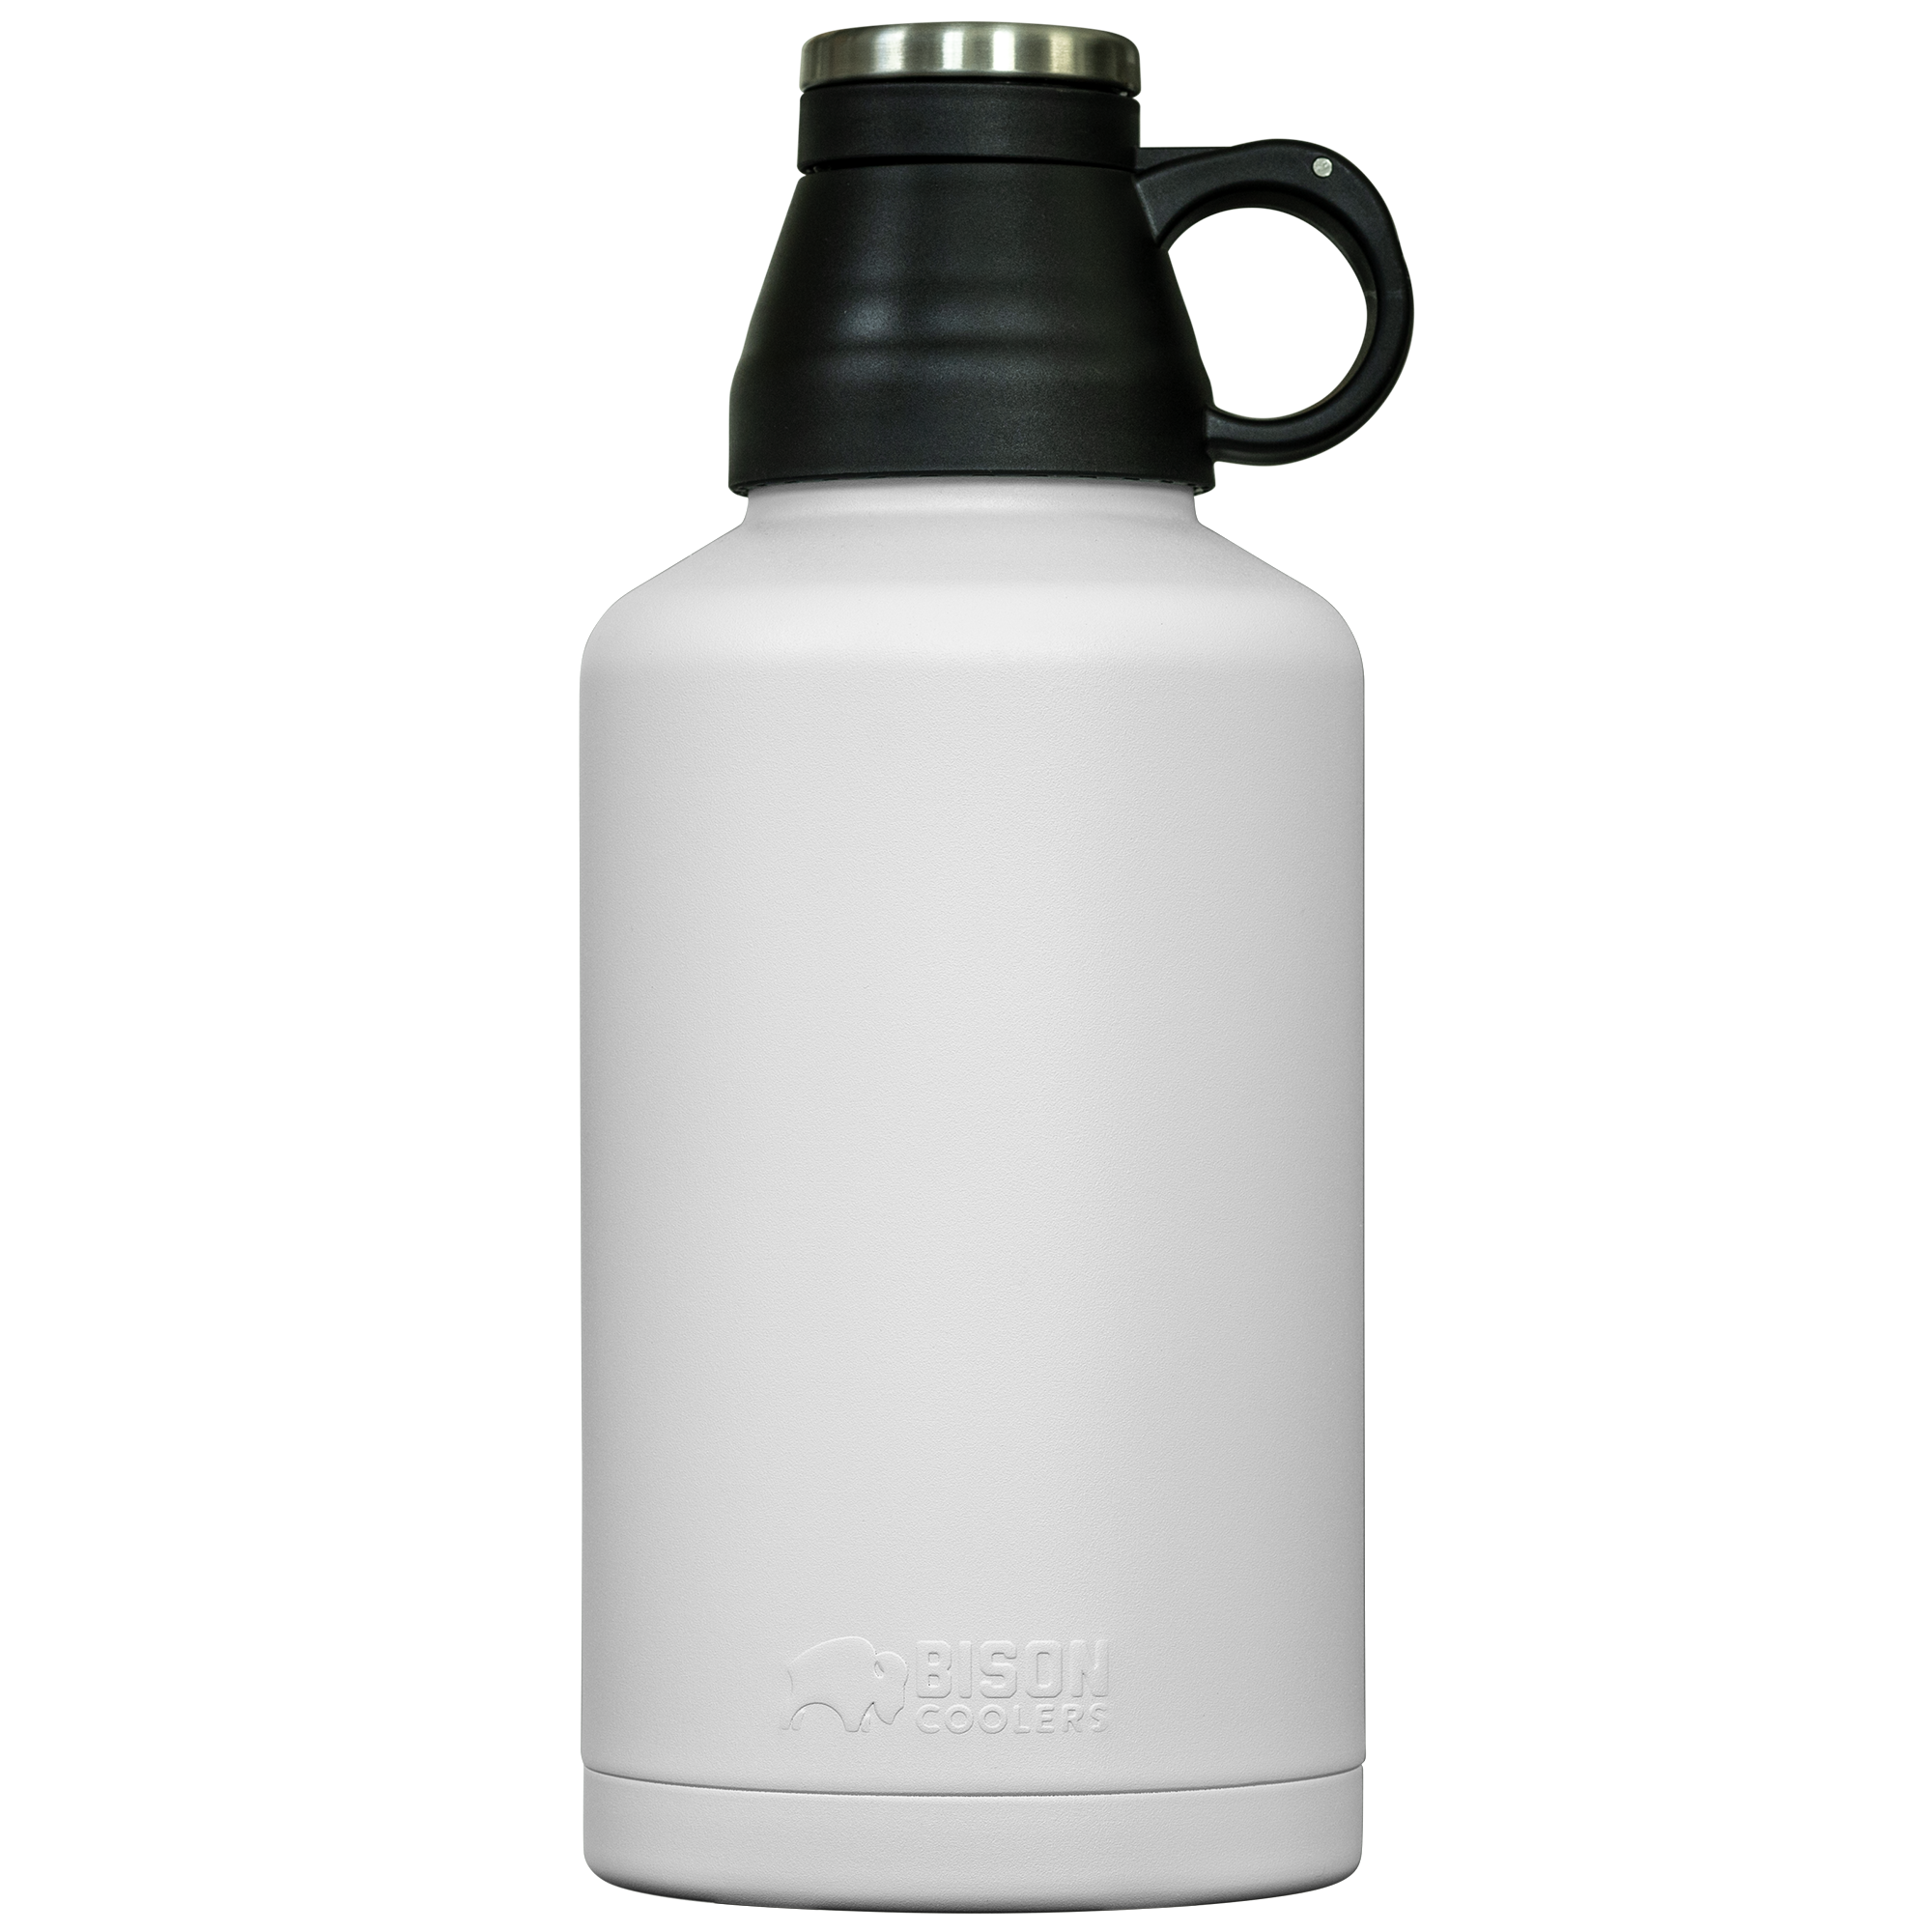 NEW -Bison Beer Growler - 64 oz. White